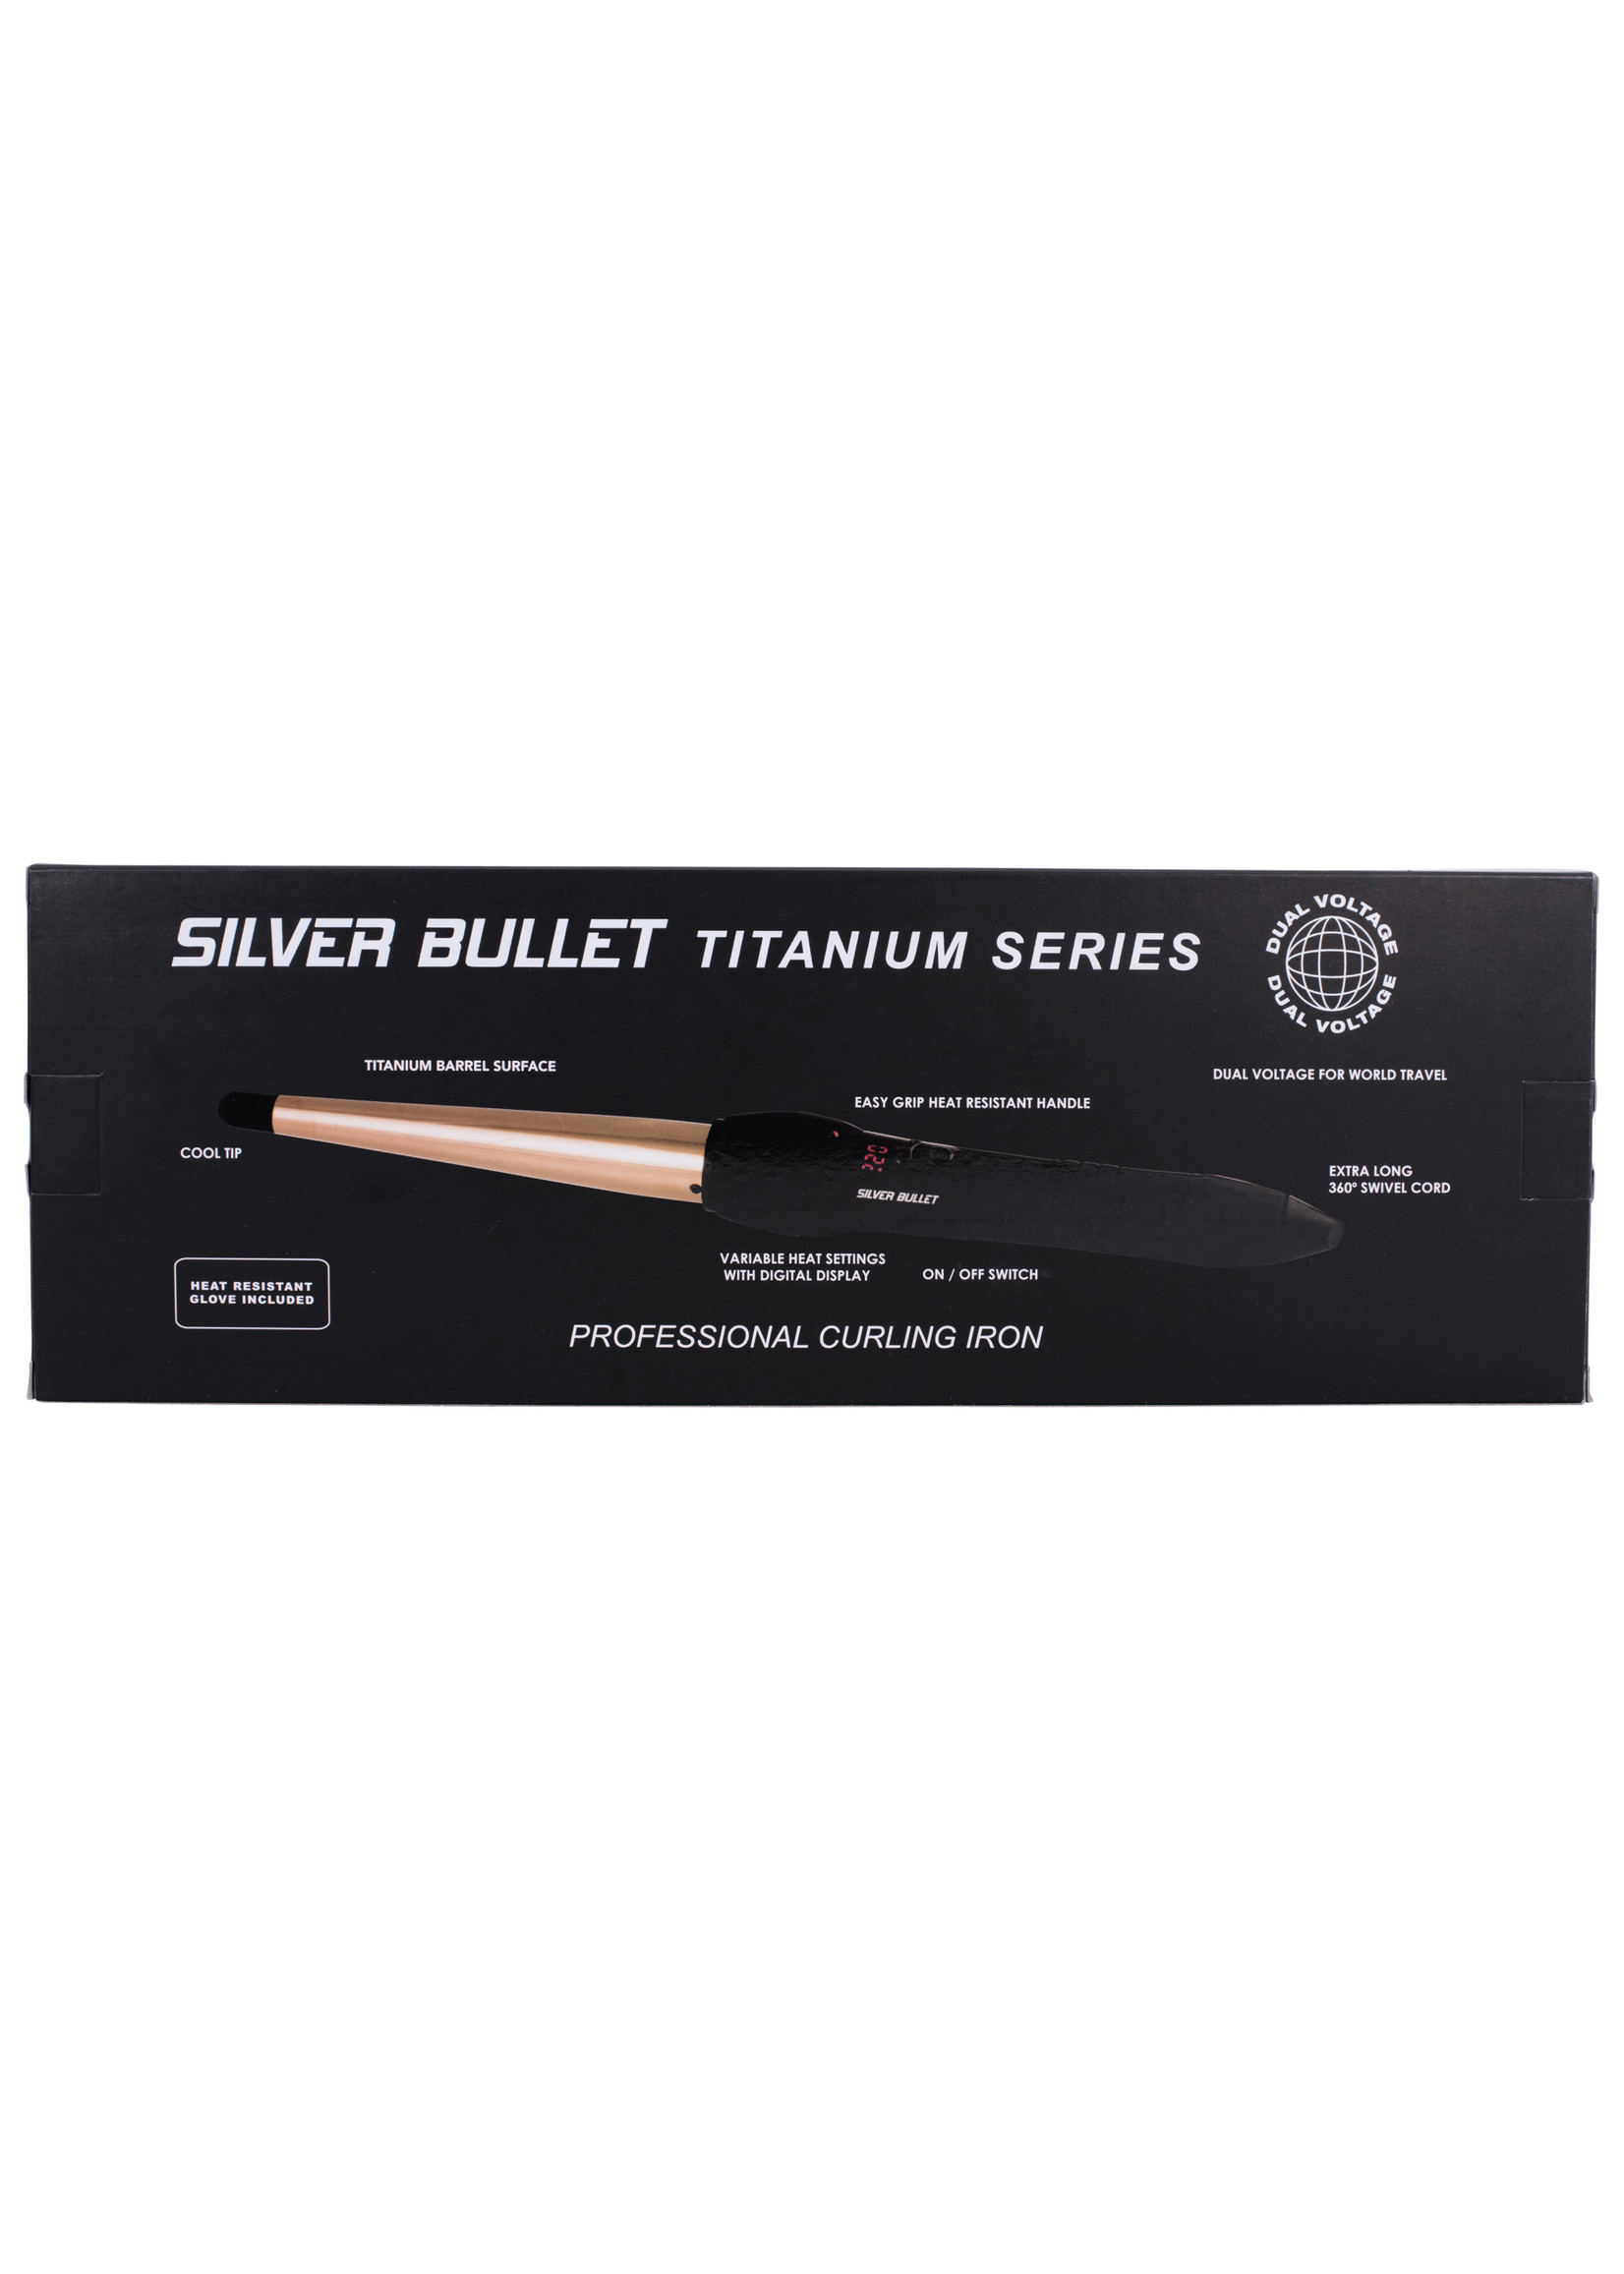 Silver Bullet Silver Bullet Fastlane Titanium Conical Wand Rose Gold Large - 19mm - 32mm